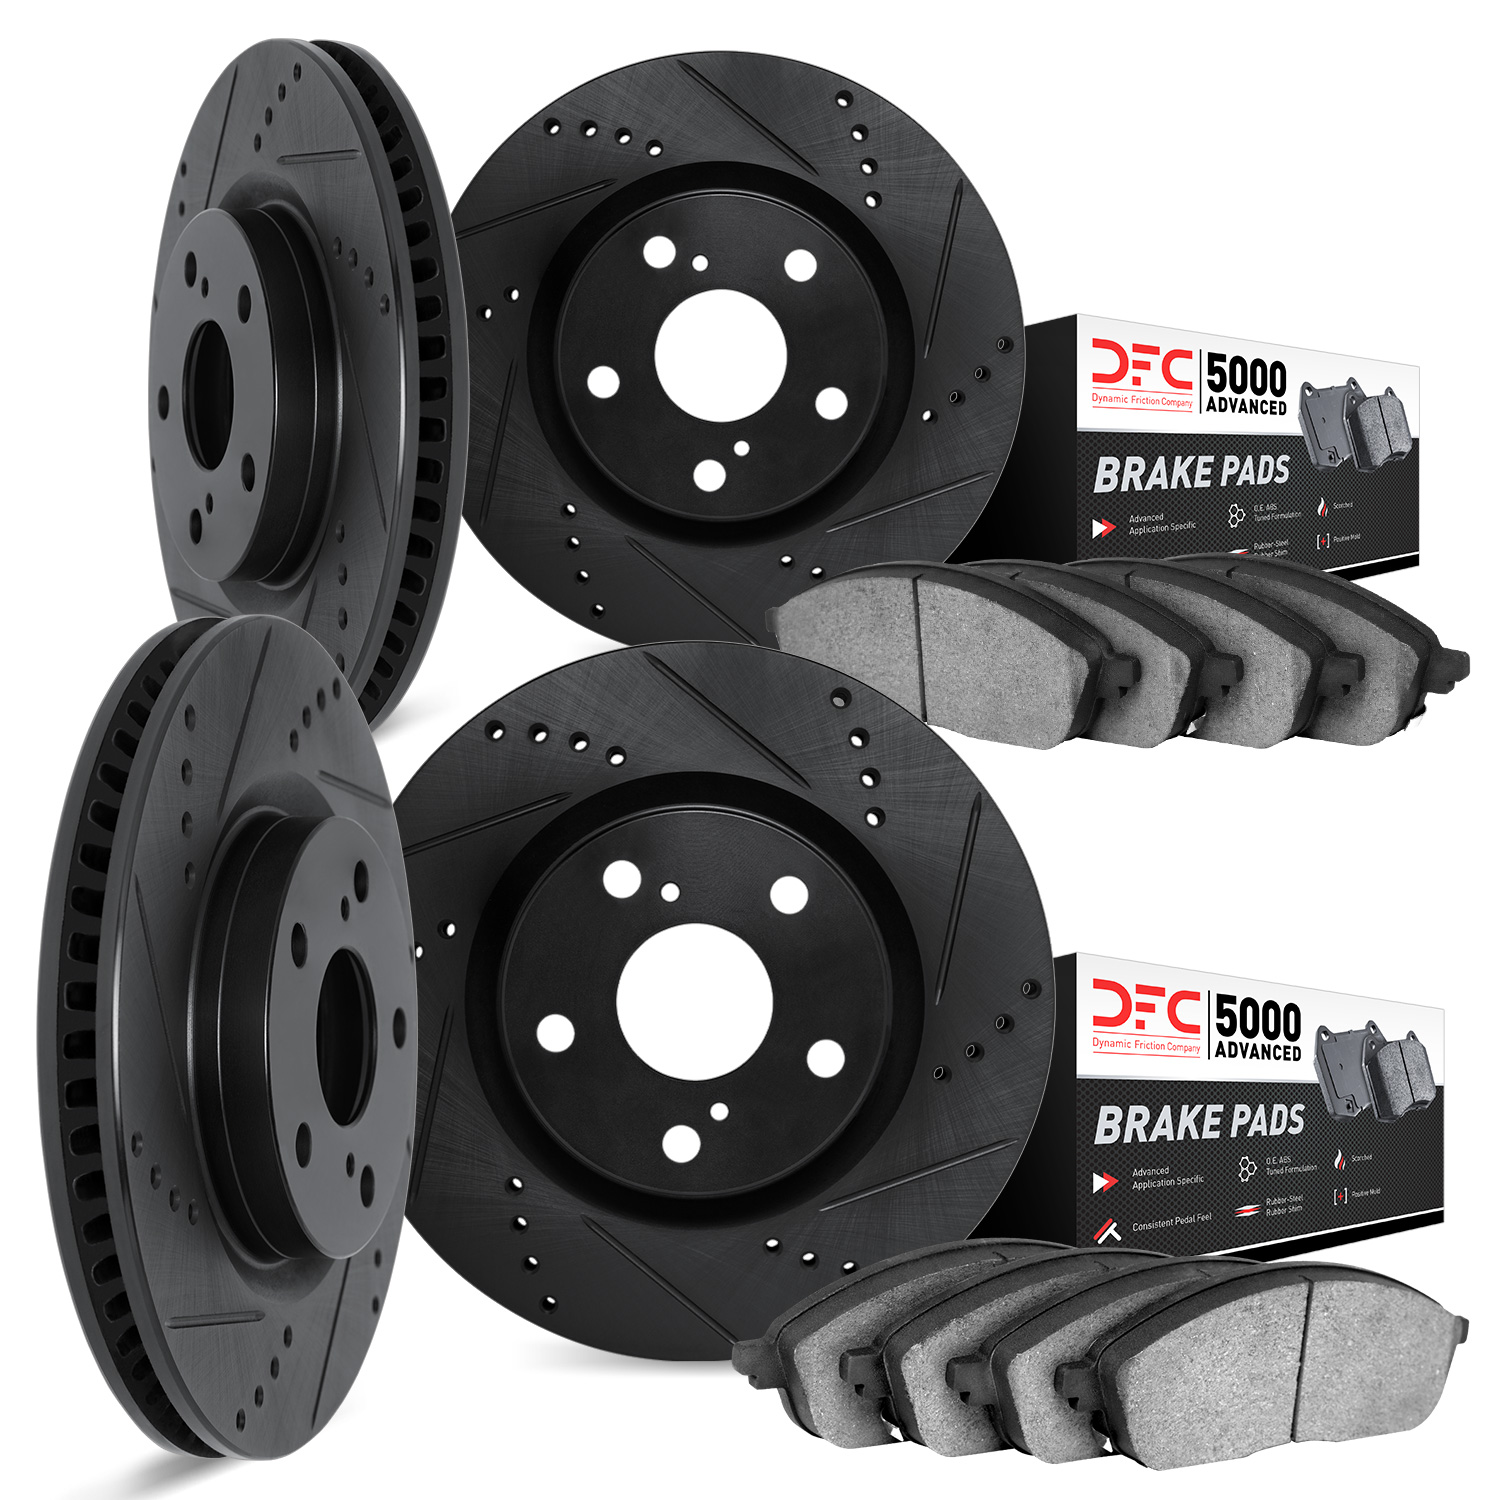 8504-31067 Drilled/Slotted Brake Rotors w/5000 Advanced Brake Pads Kit [Black], 2007-2013 BMW, Position: Front and Rear